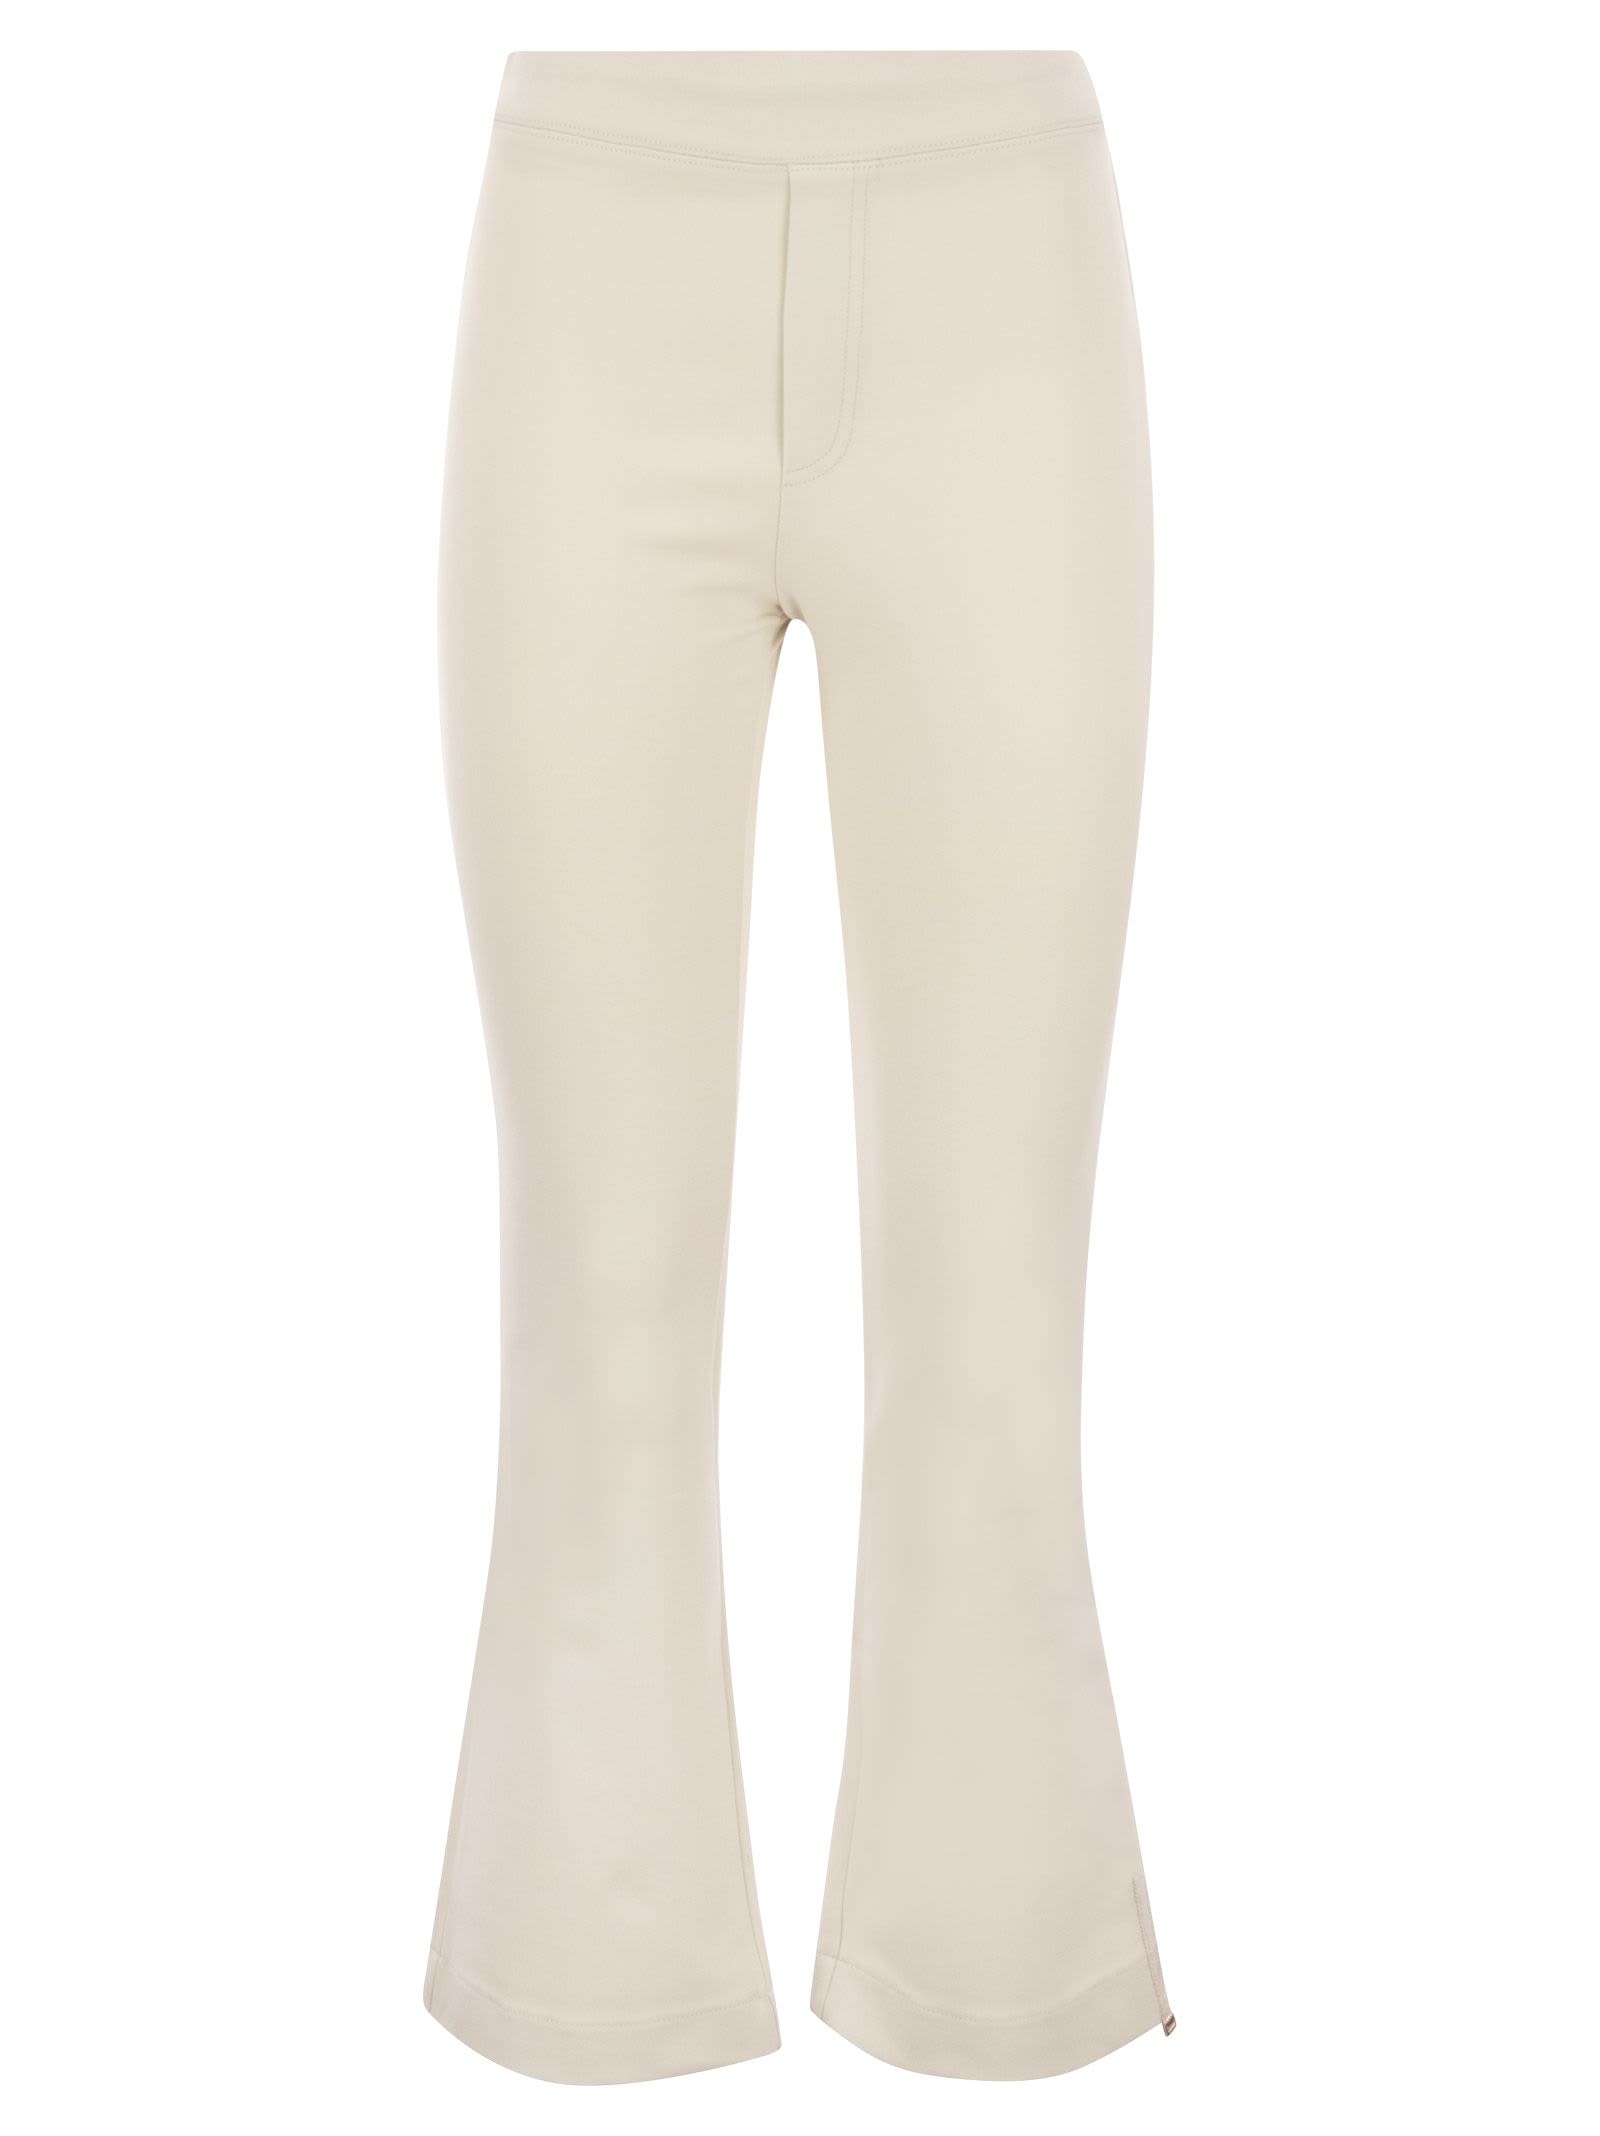 HERNO VISCOSE JERSEY TROUSERS